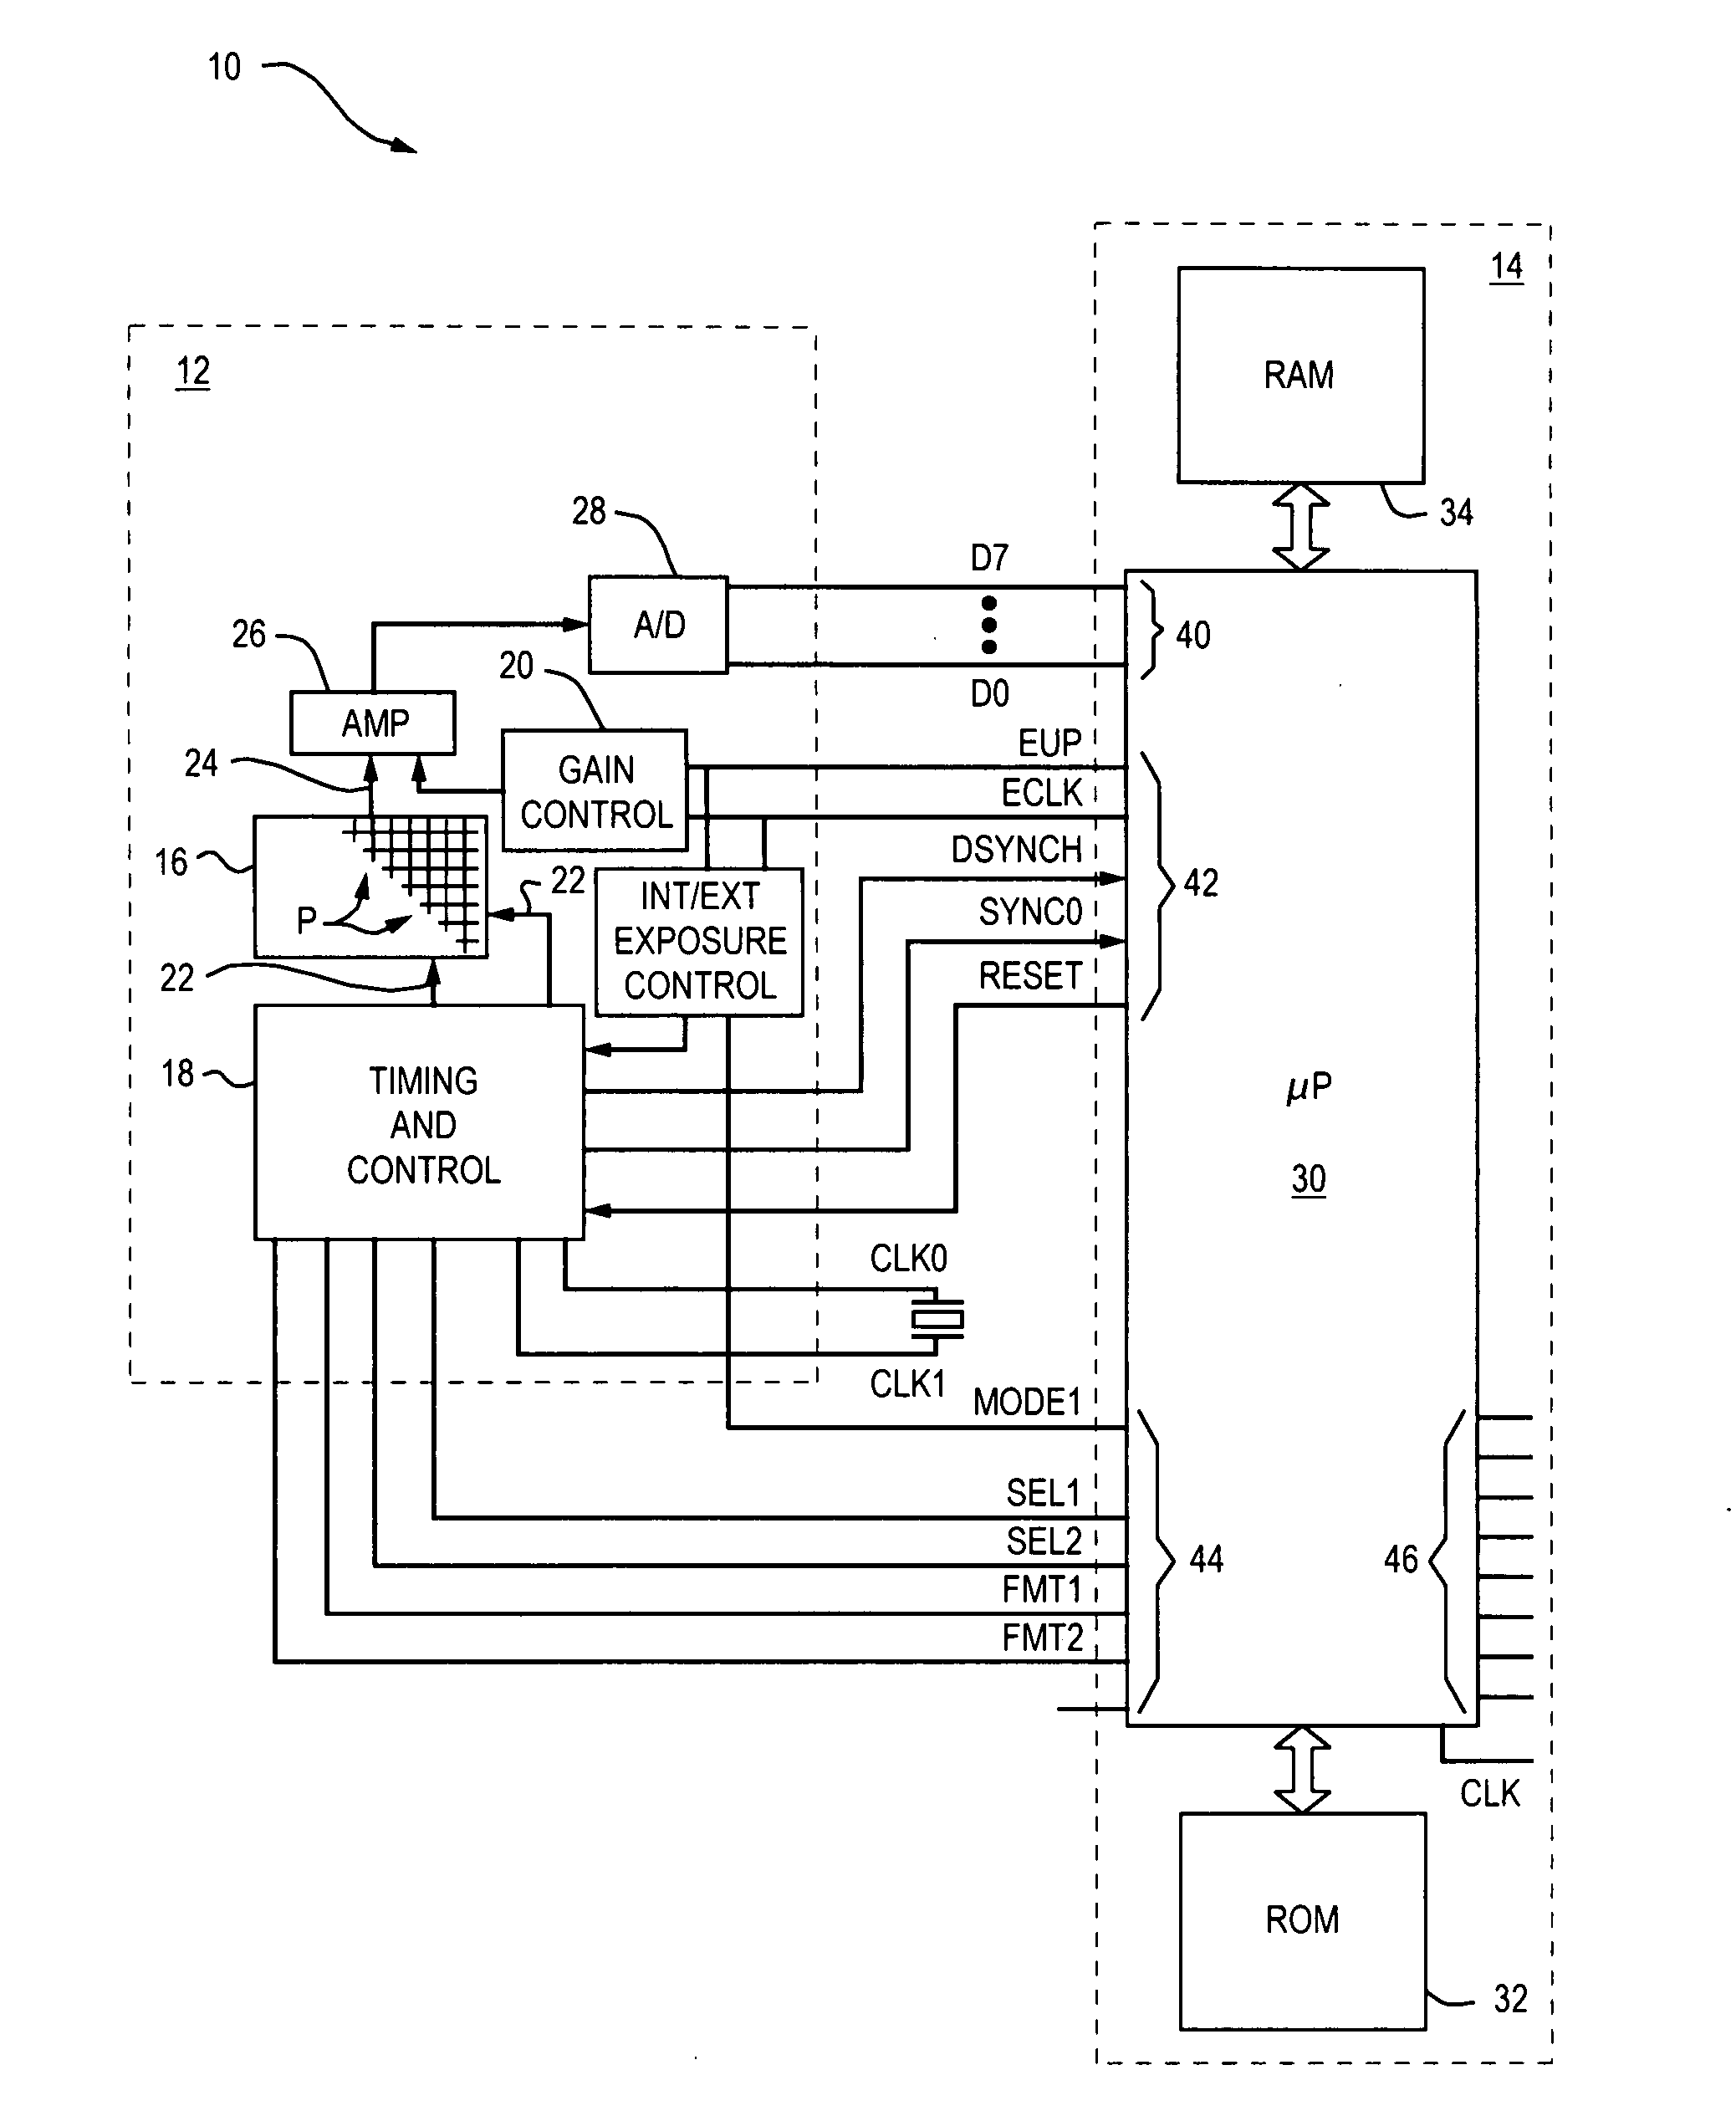 Fixed pattern noise compensation method and apparatus